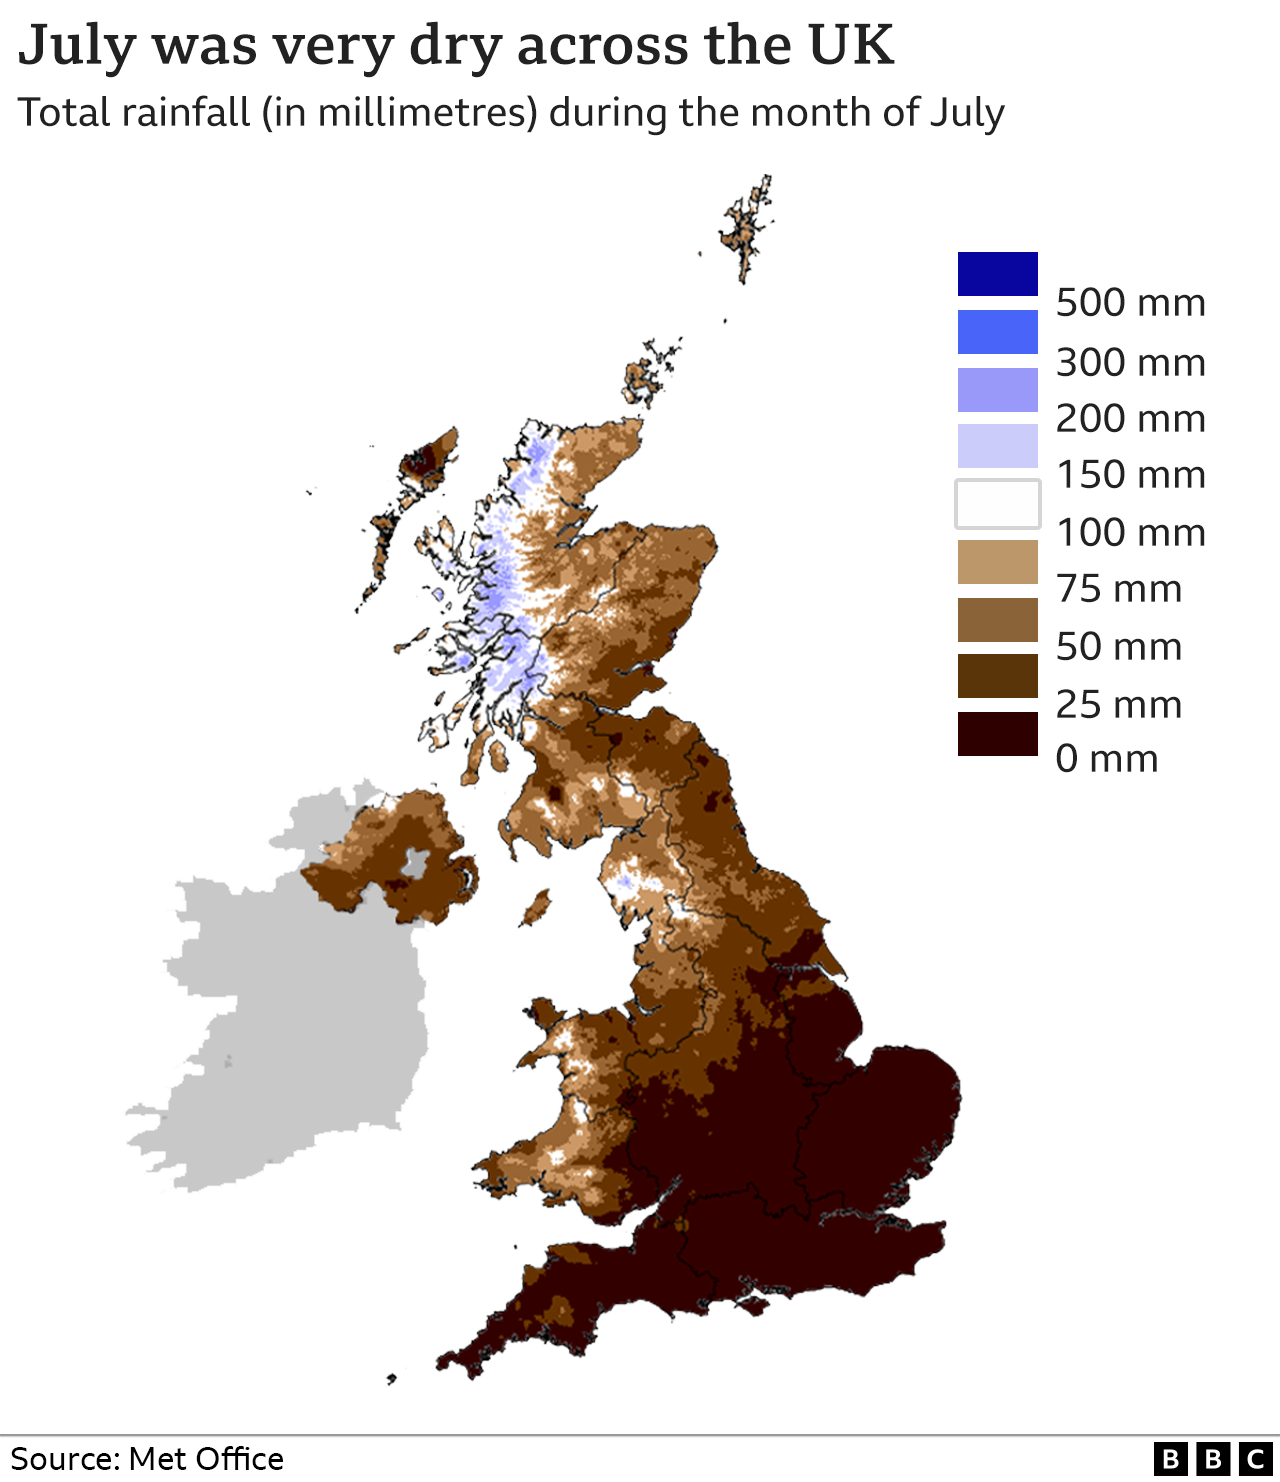 Map showing rainfall in the UK during July 2022